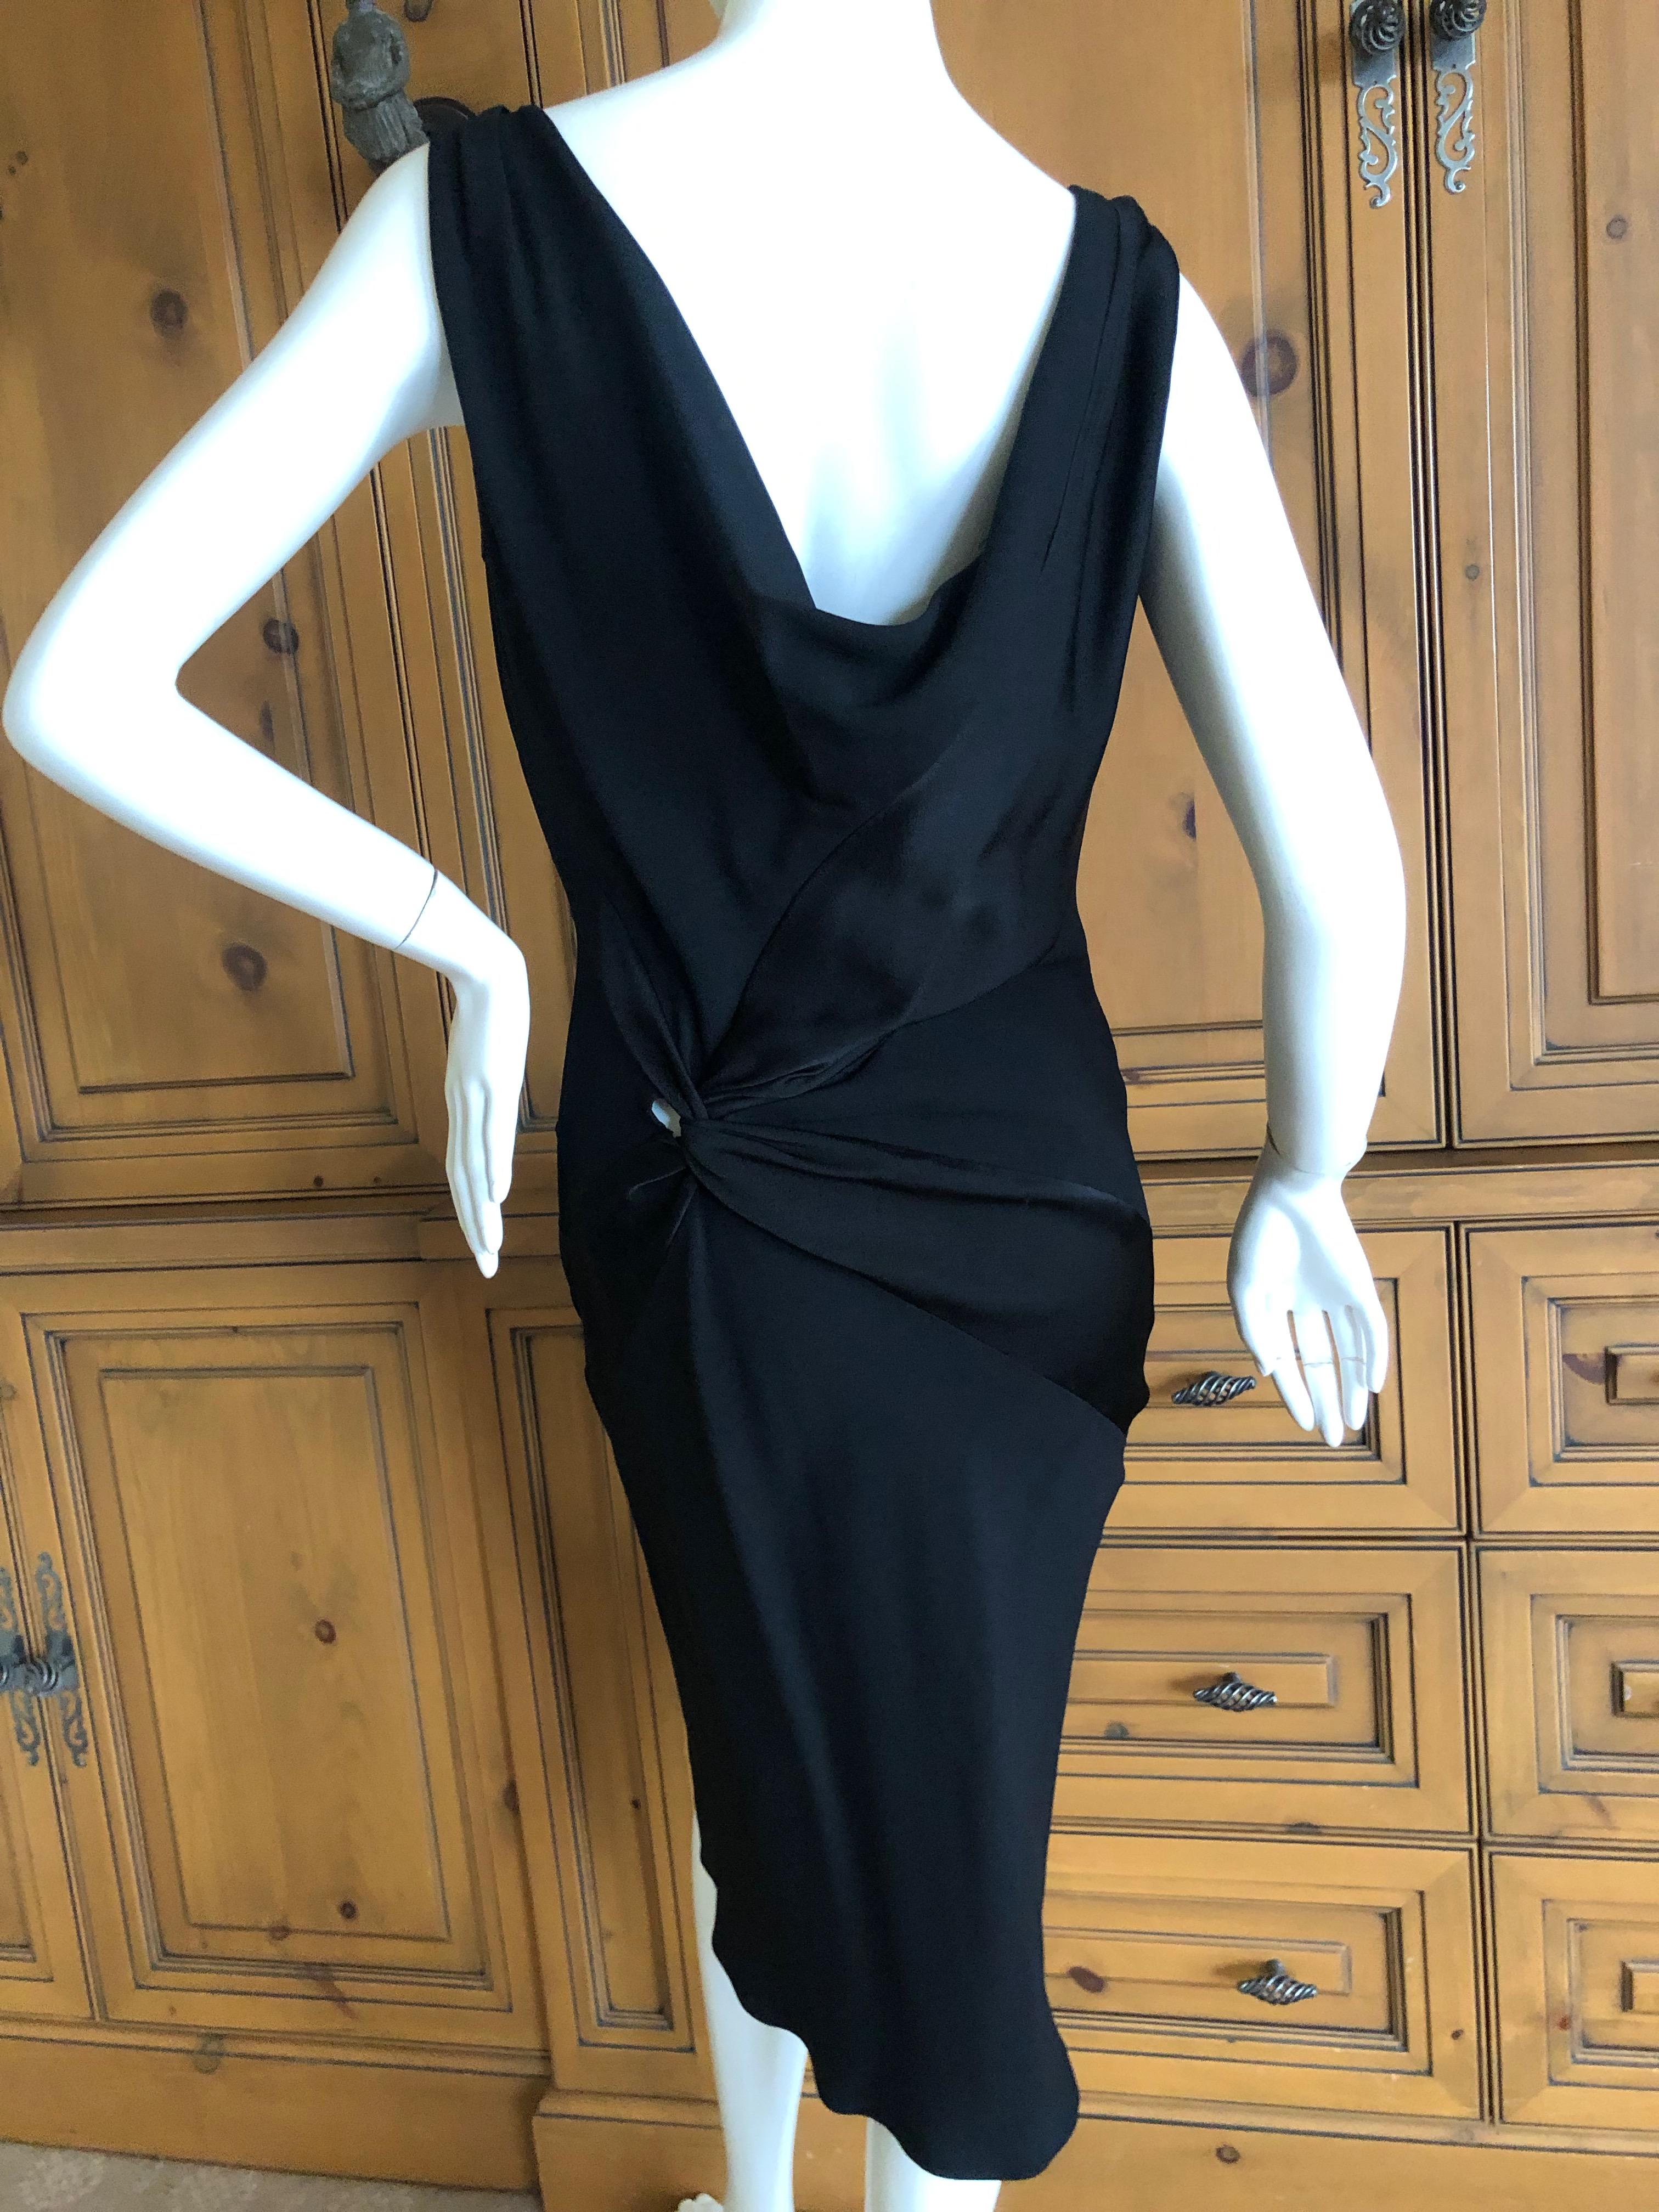 John Galliano Vintage 1990's Low Cut Black Shine and Matte Knot Dress For Sale 2